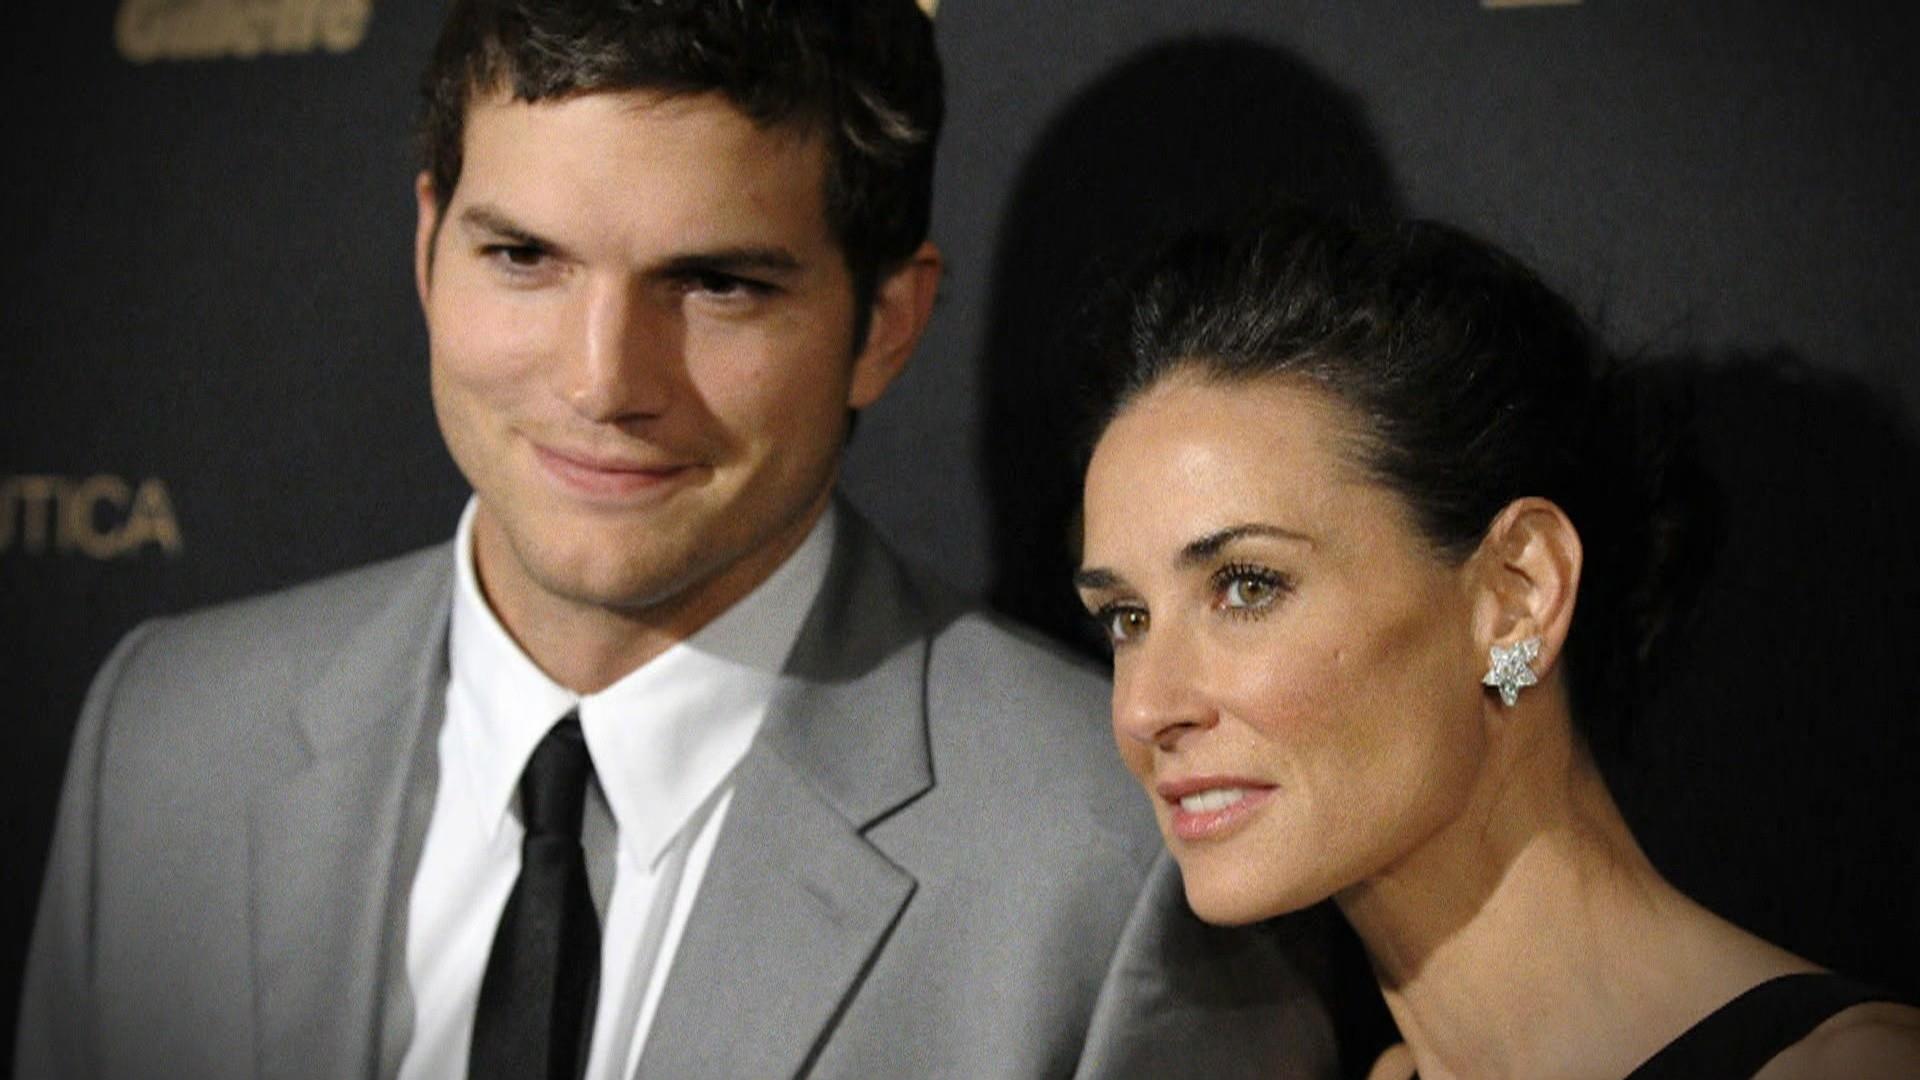 Demi Moore opens up about miscarriage in new memoir.